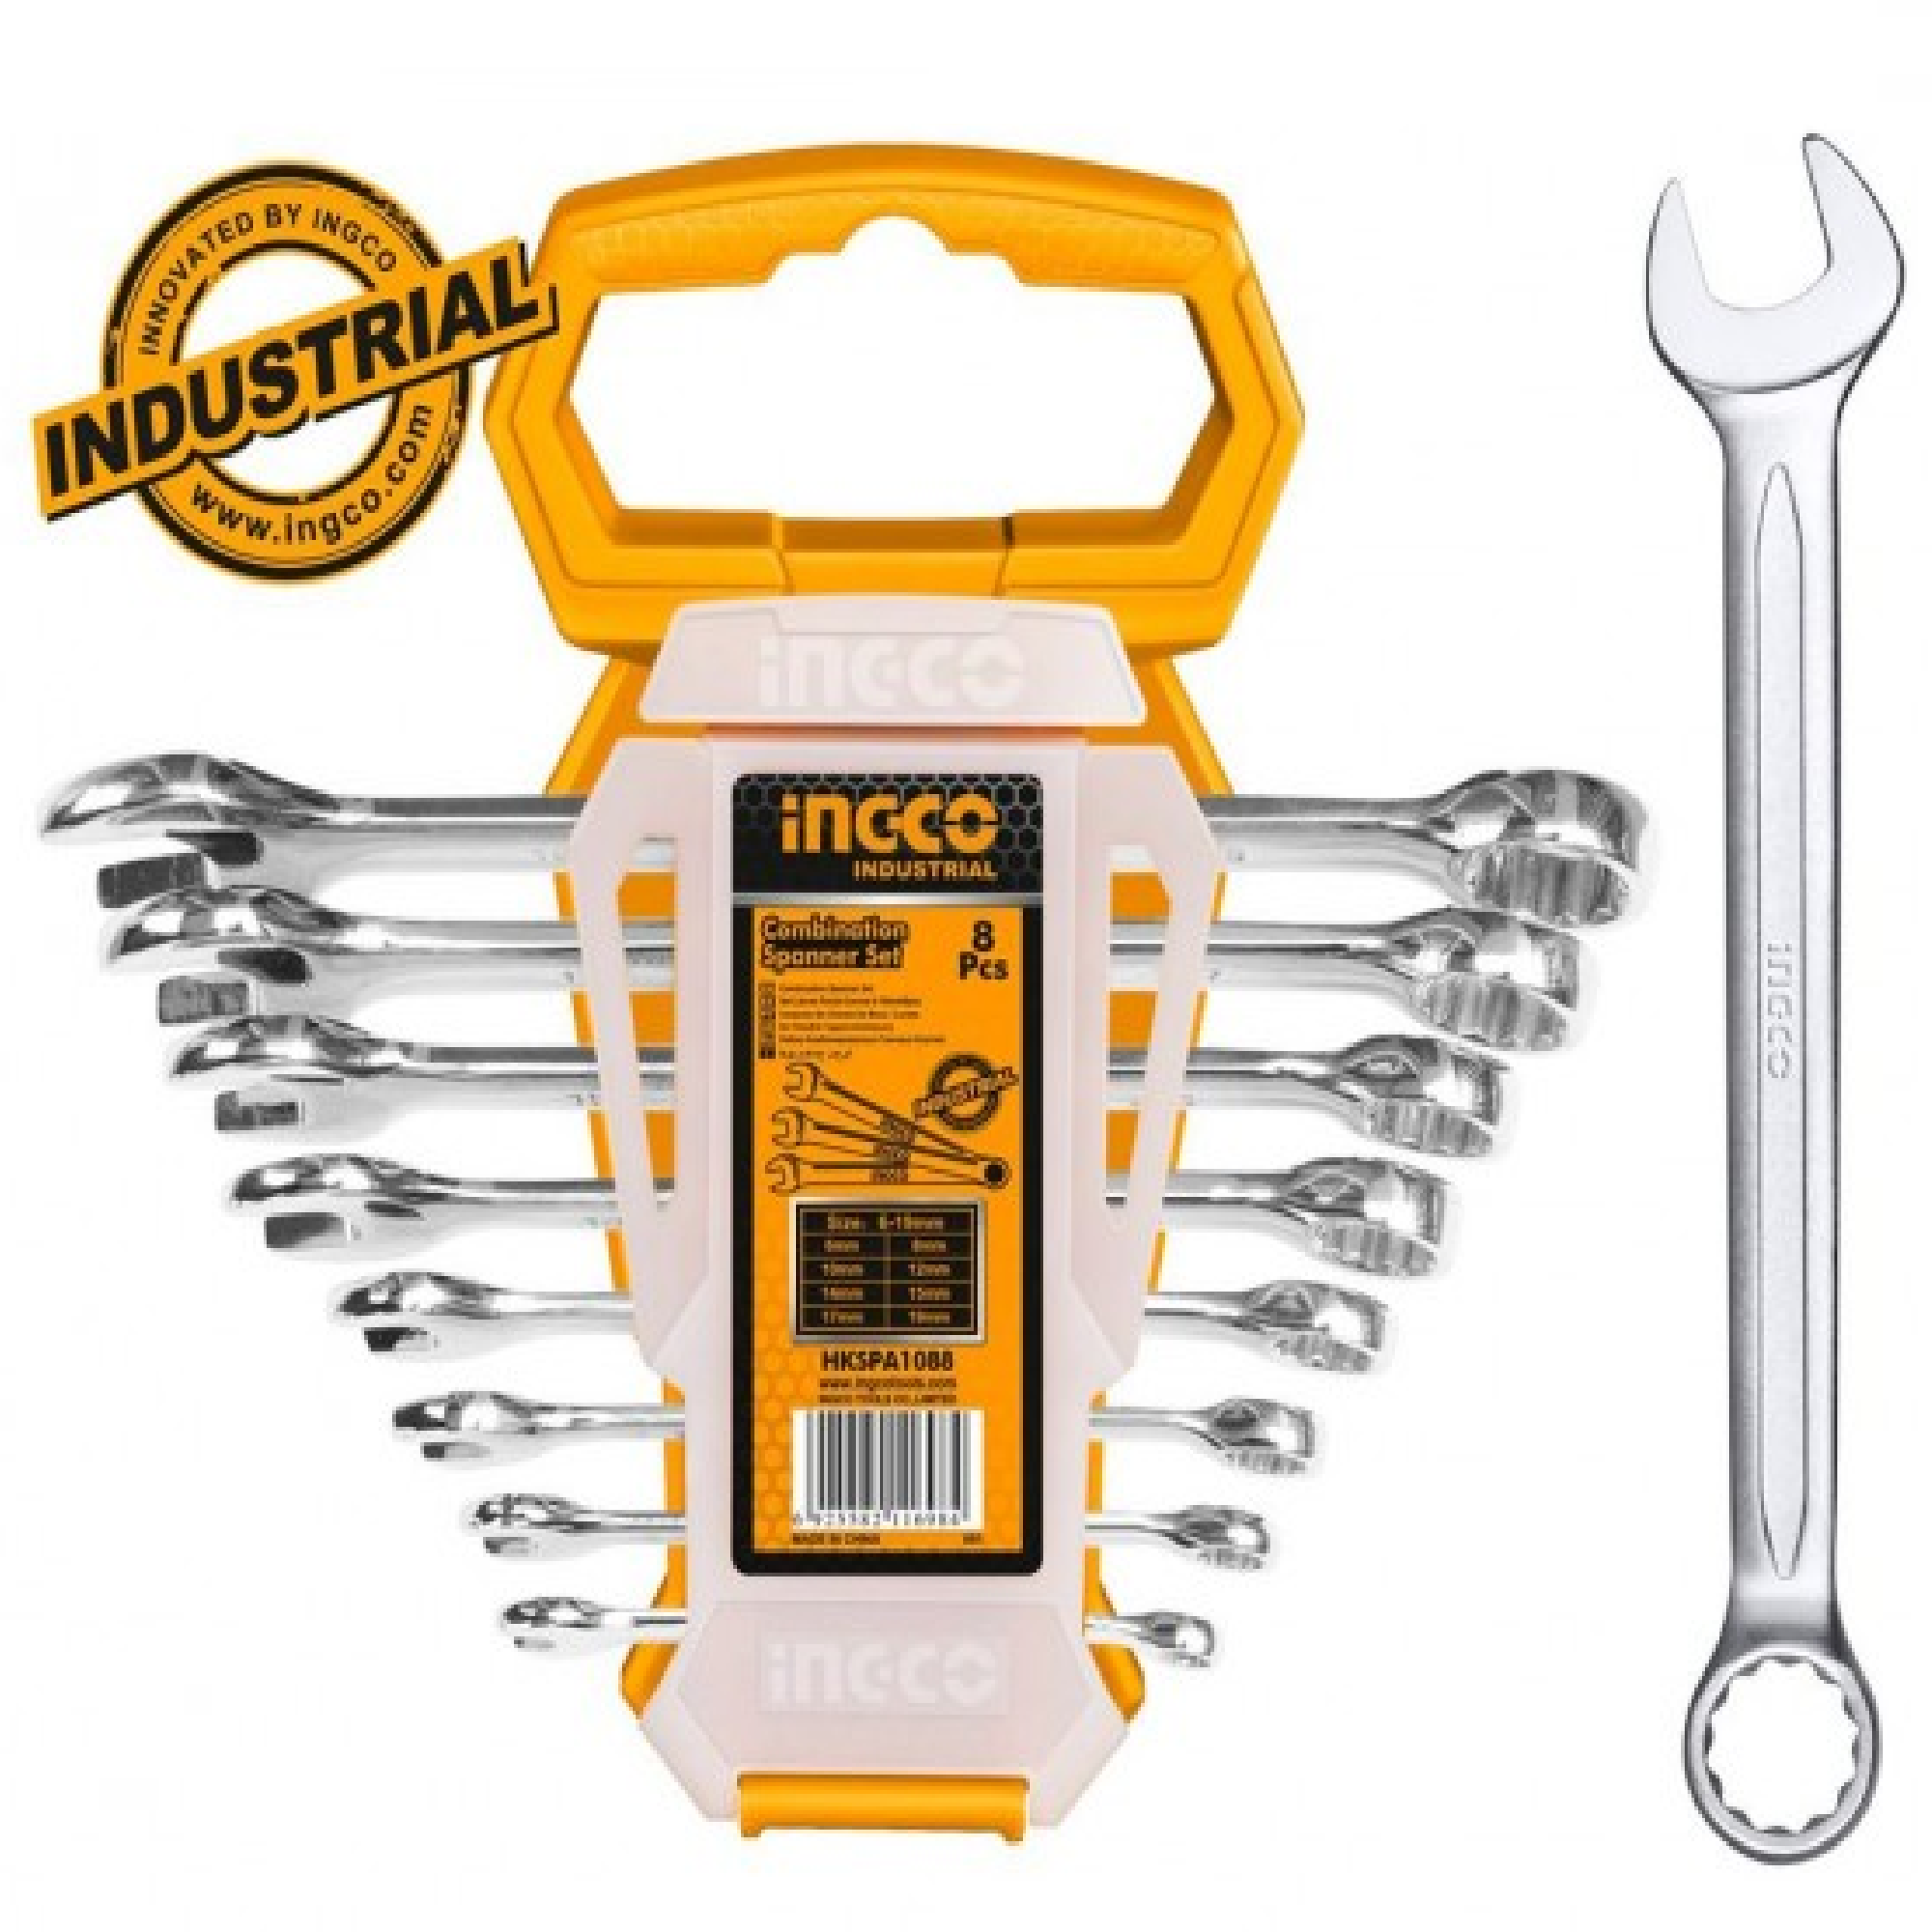 INGCO 8PC Combination Wrench Spanner Set HKSPA1088